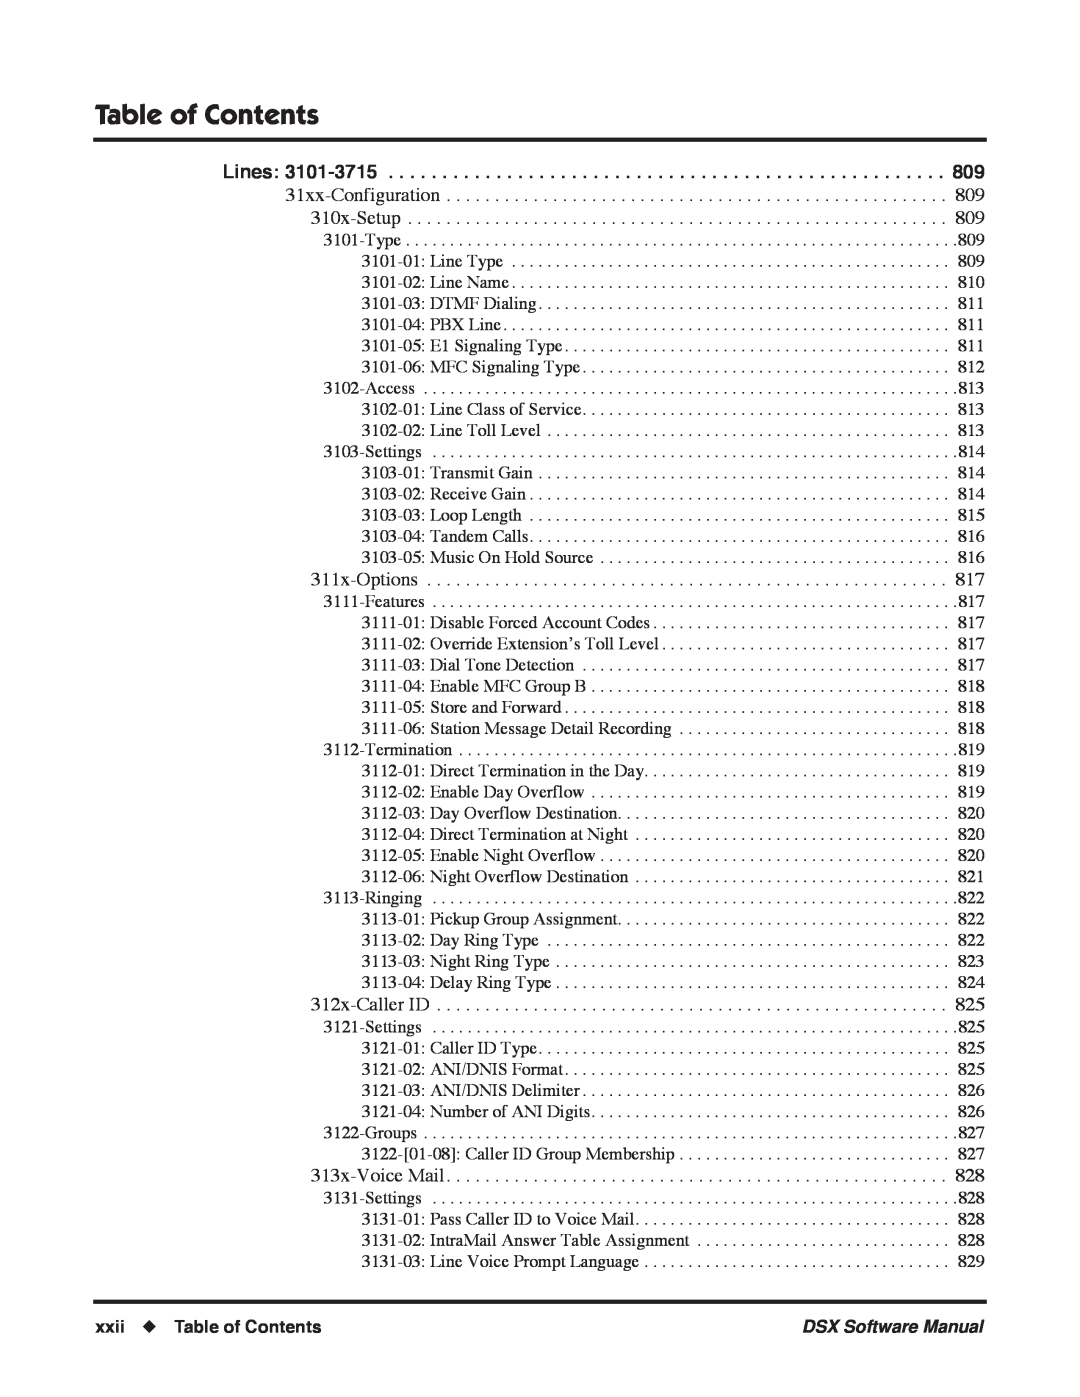 NEC N 1093100, P software manual xxii Table of Contents 